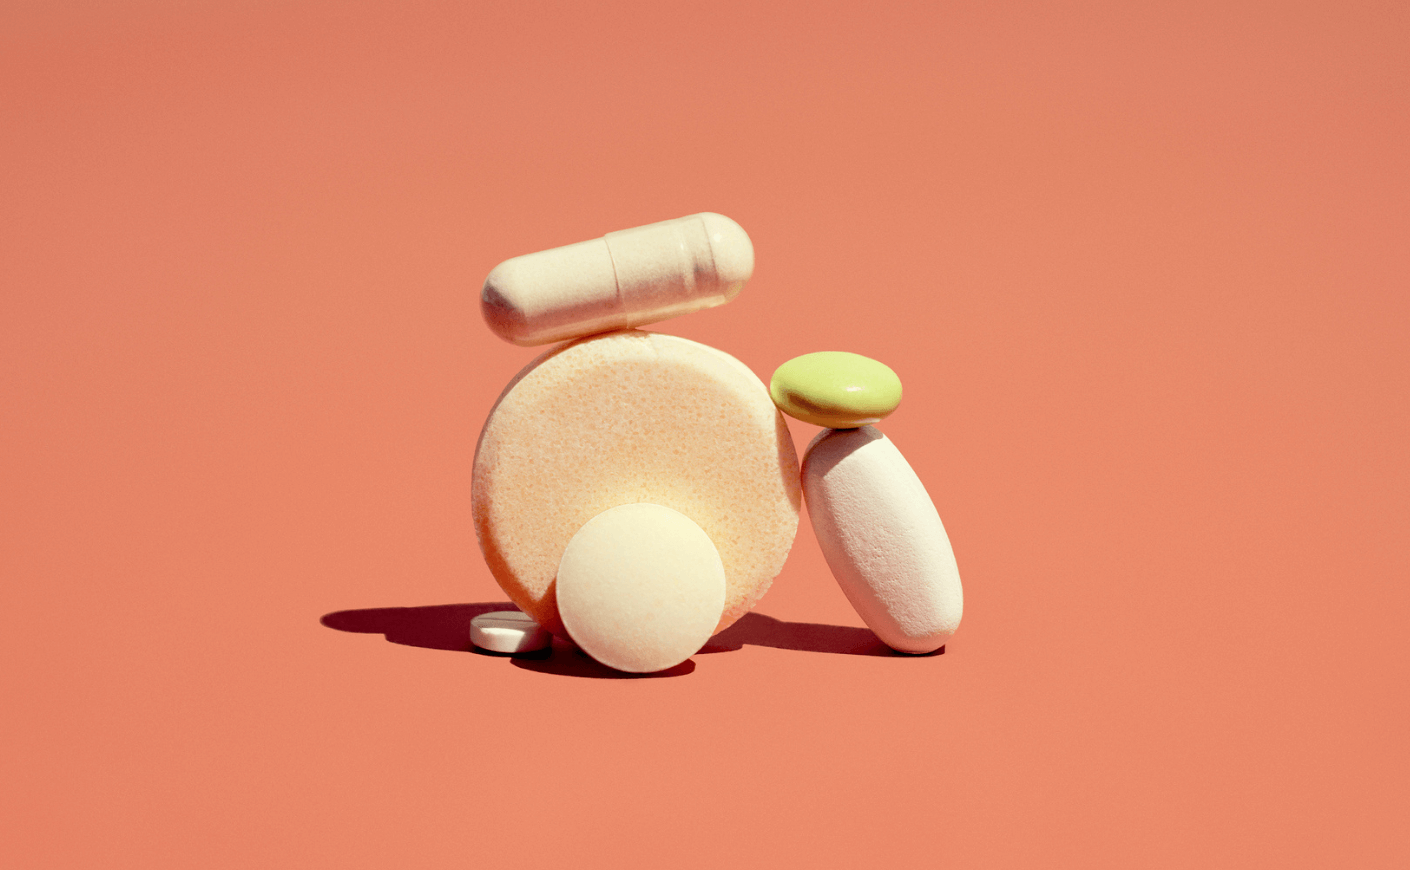 pills on a pink background